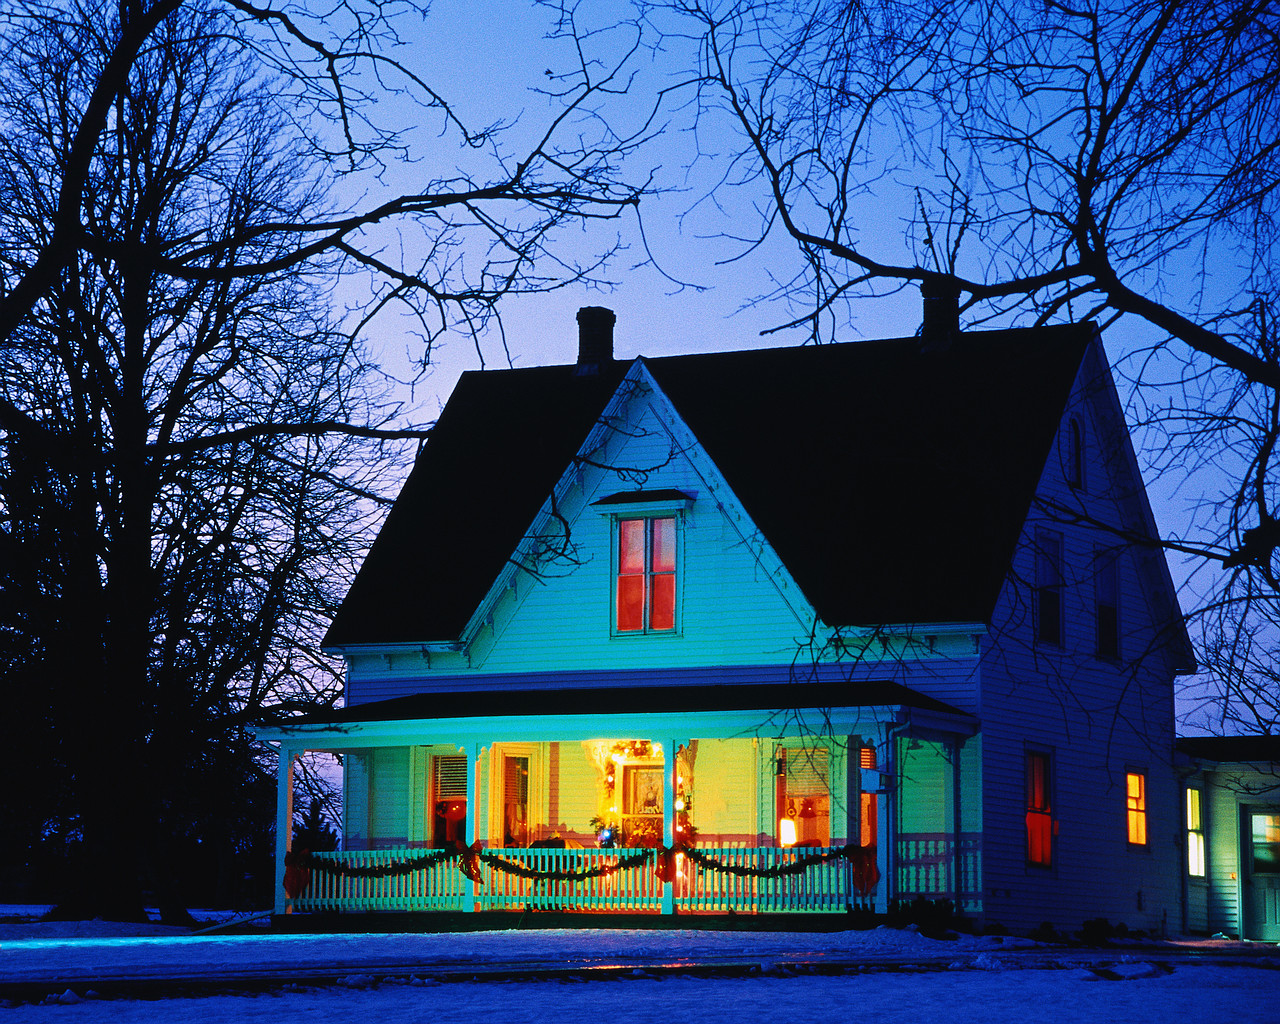 Getting your house ready for winter takes preparation